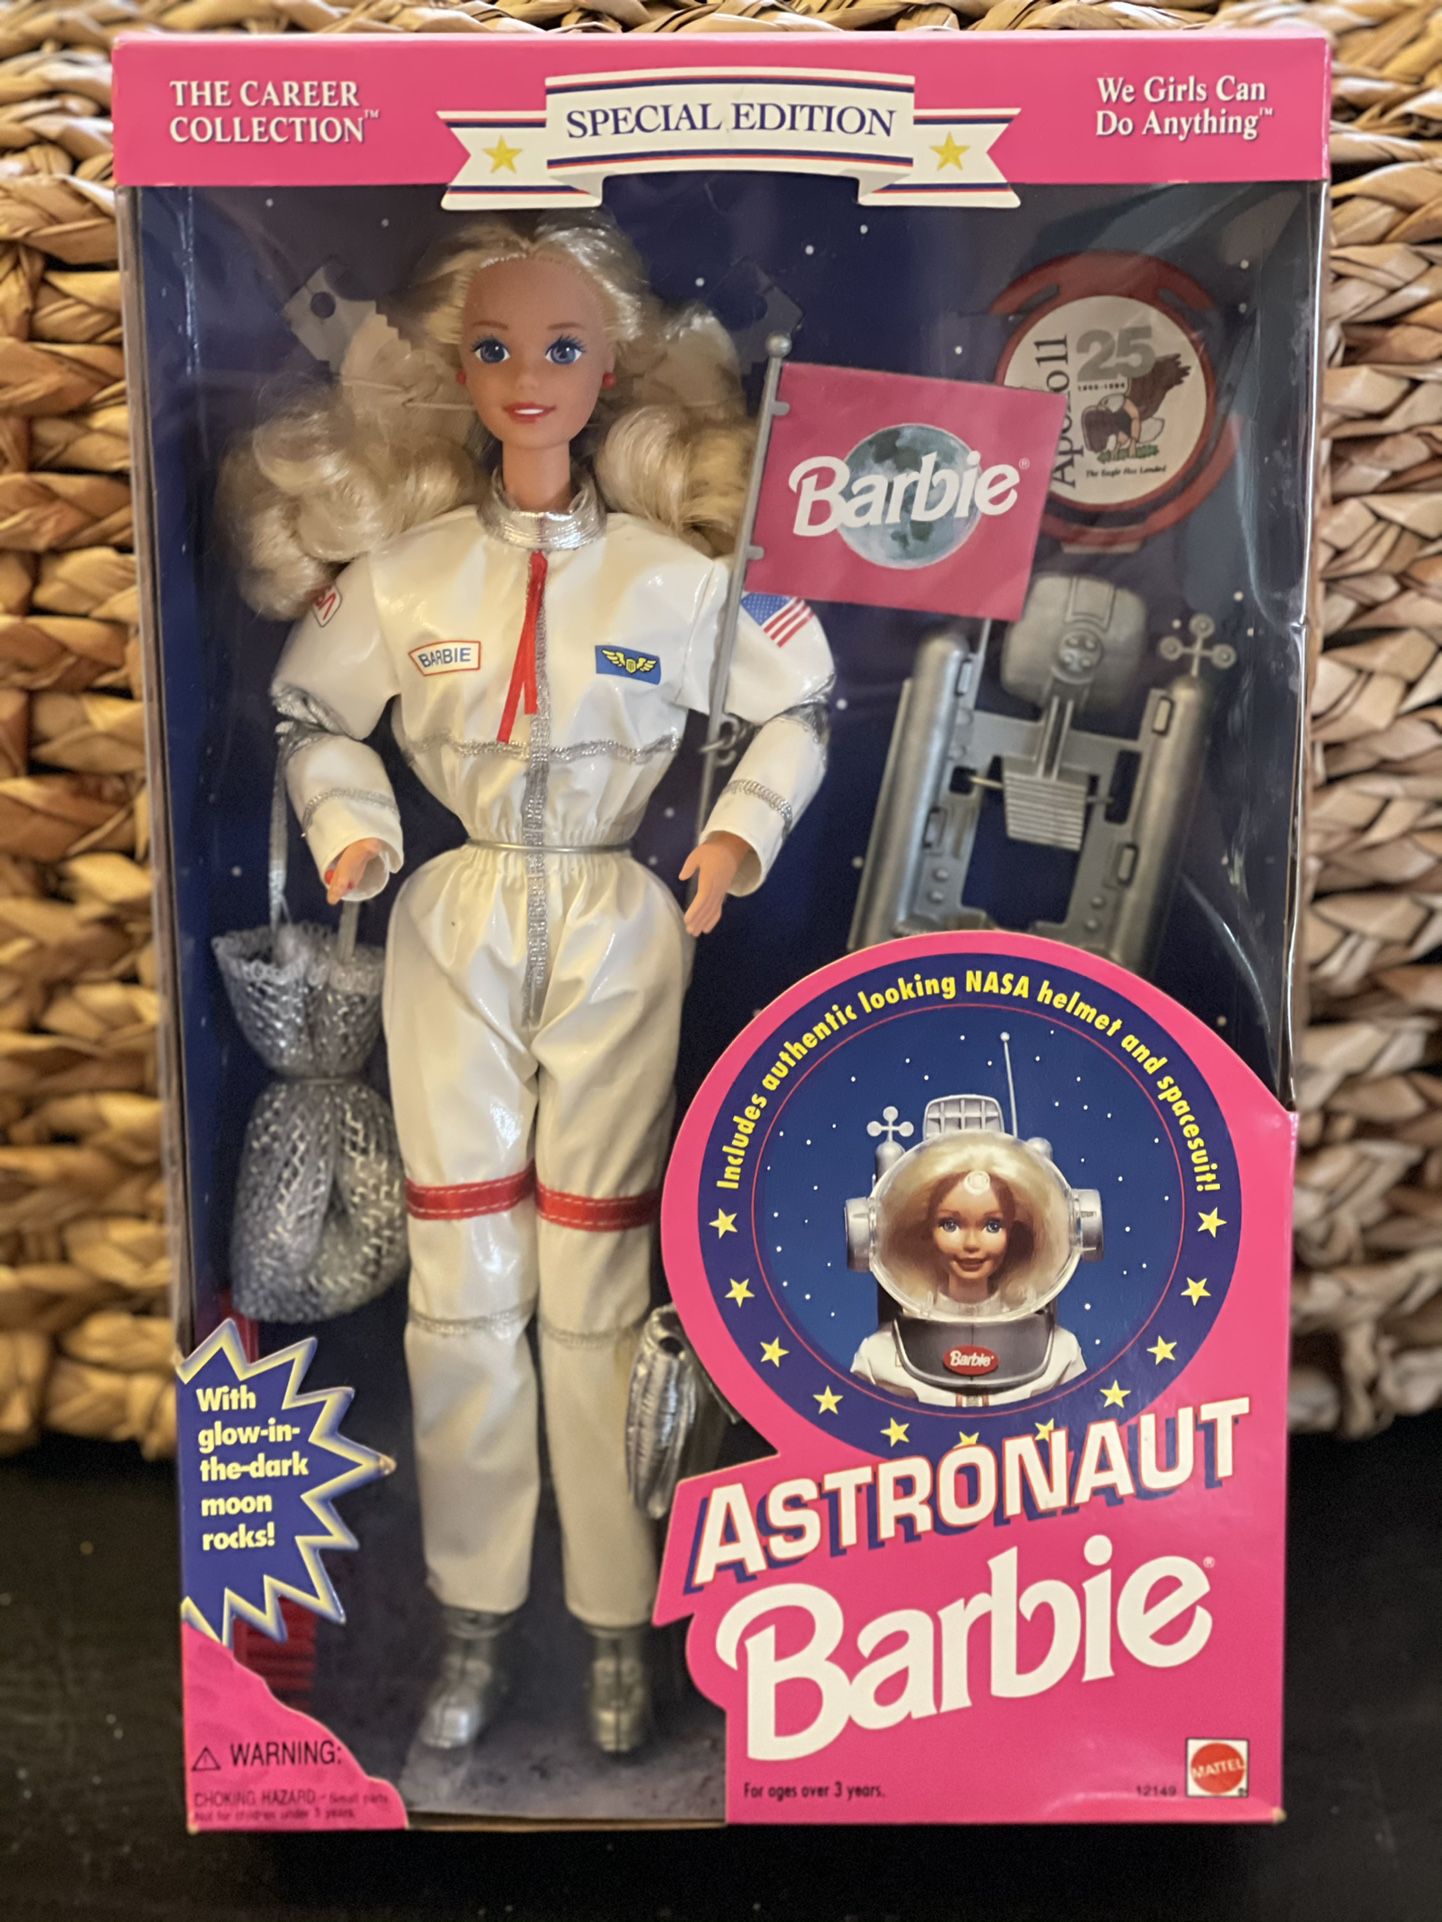 Vintage Astronaut Barbie Doll 1994, Career Collection Special Edition NRFB 12149